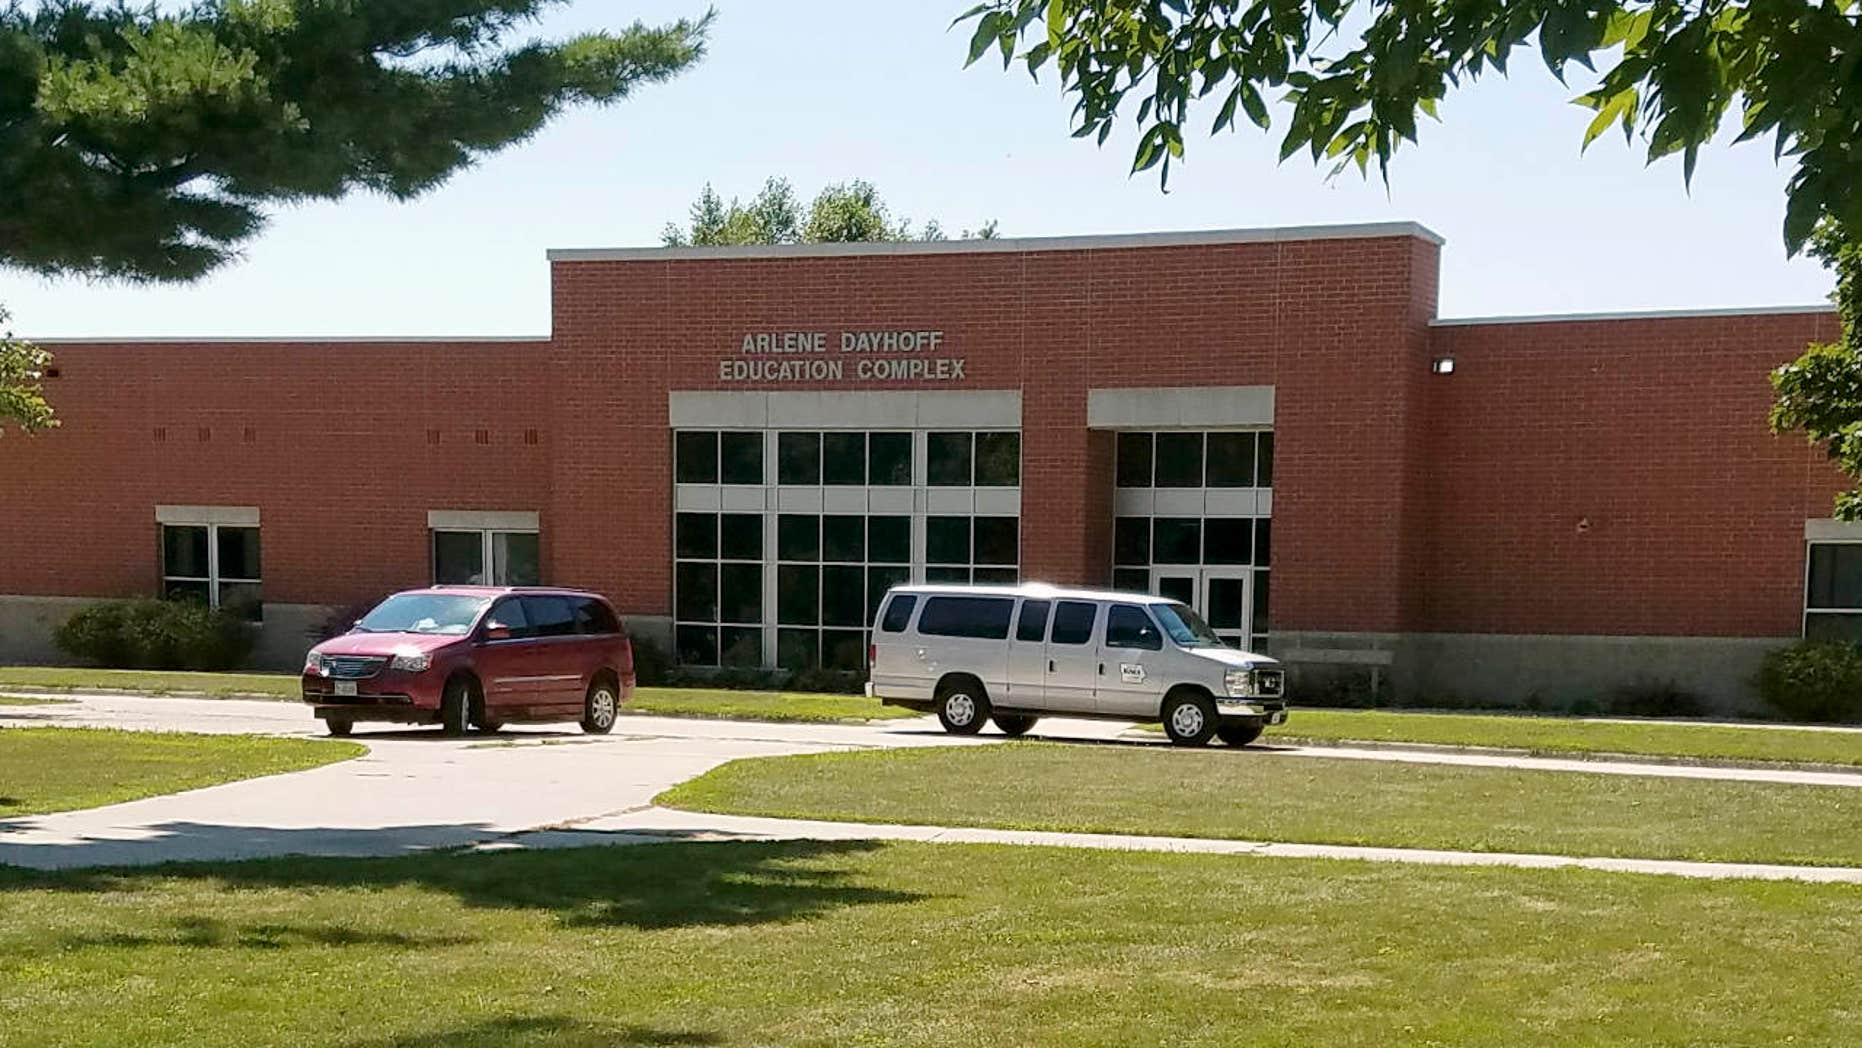 Iowa school for juvenile offenders subjects boys to restraints, denies